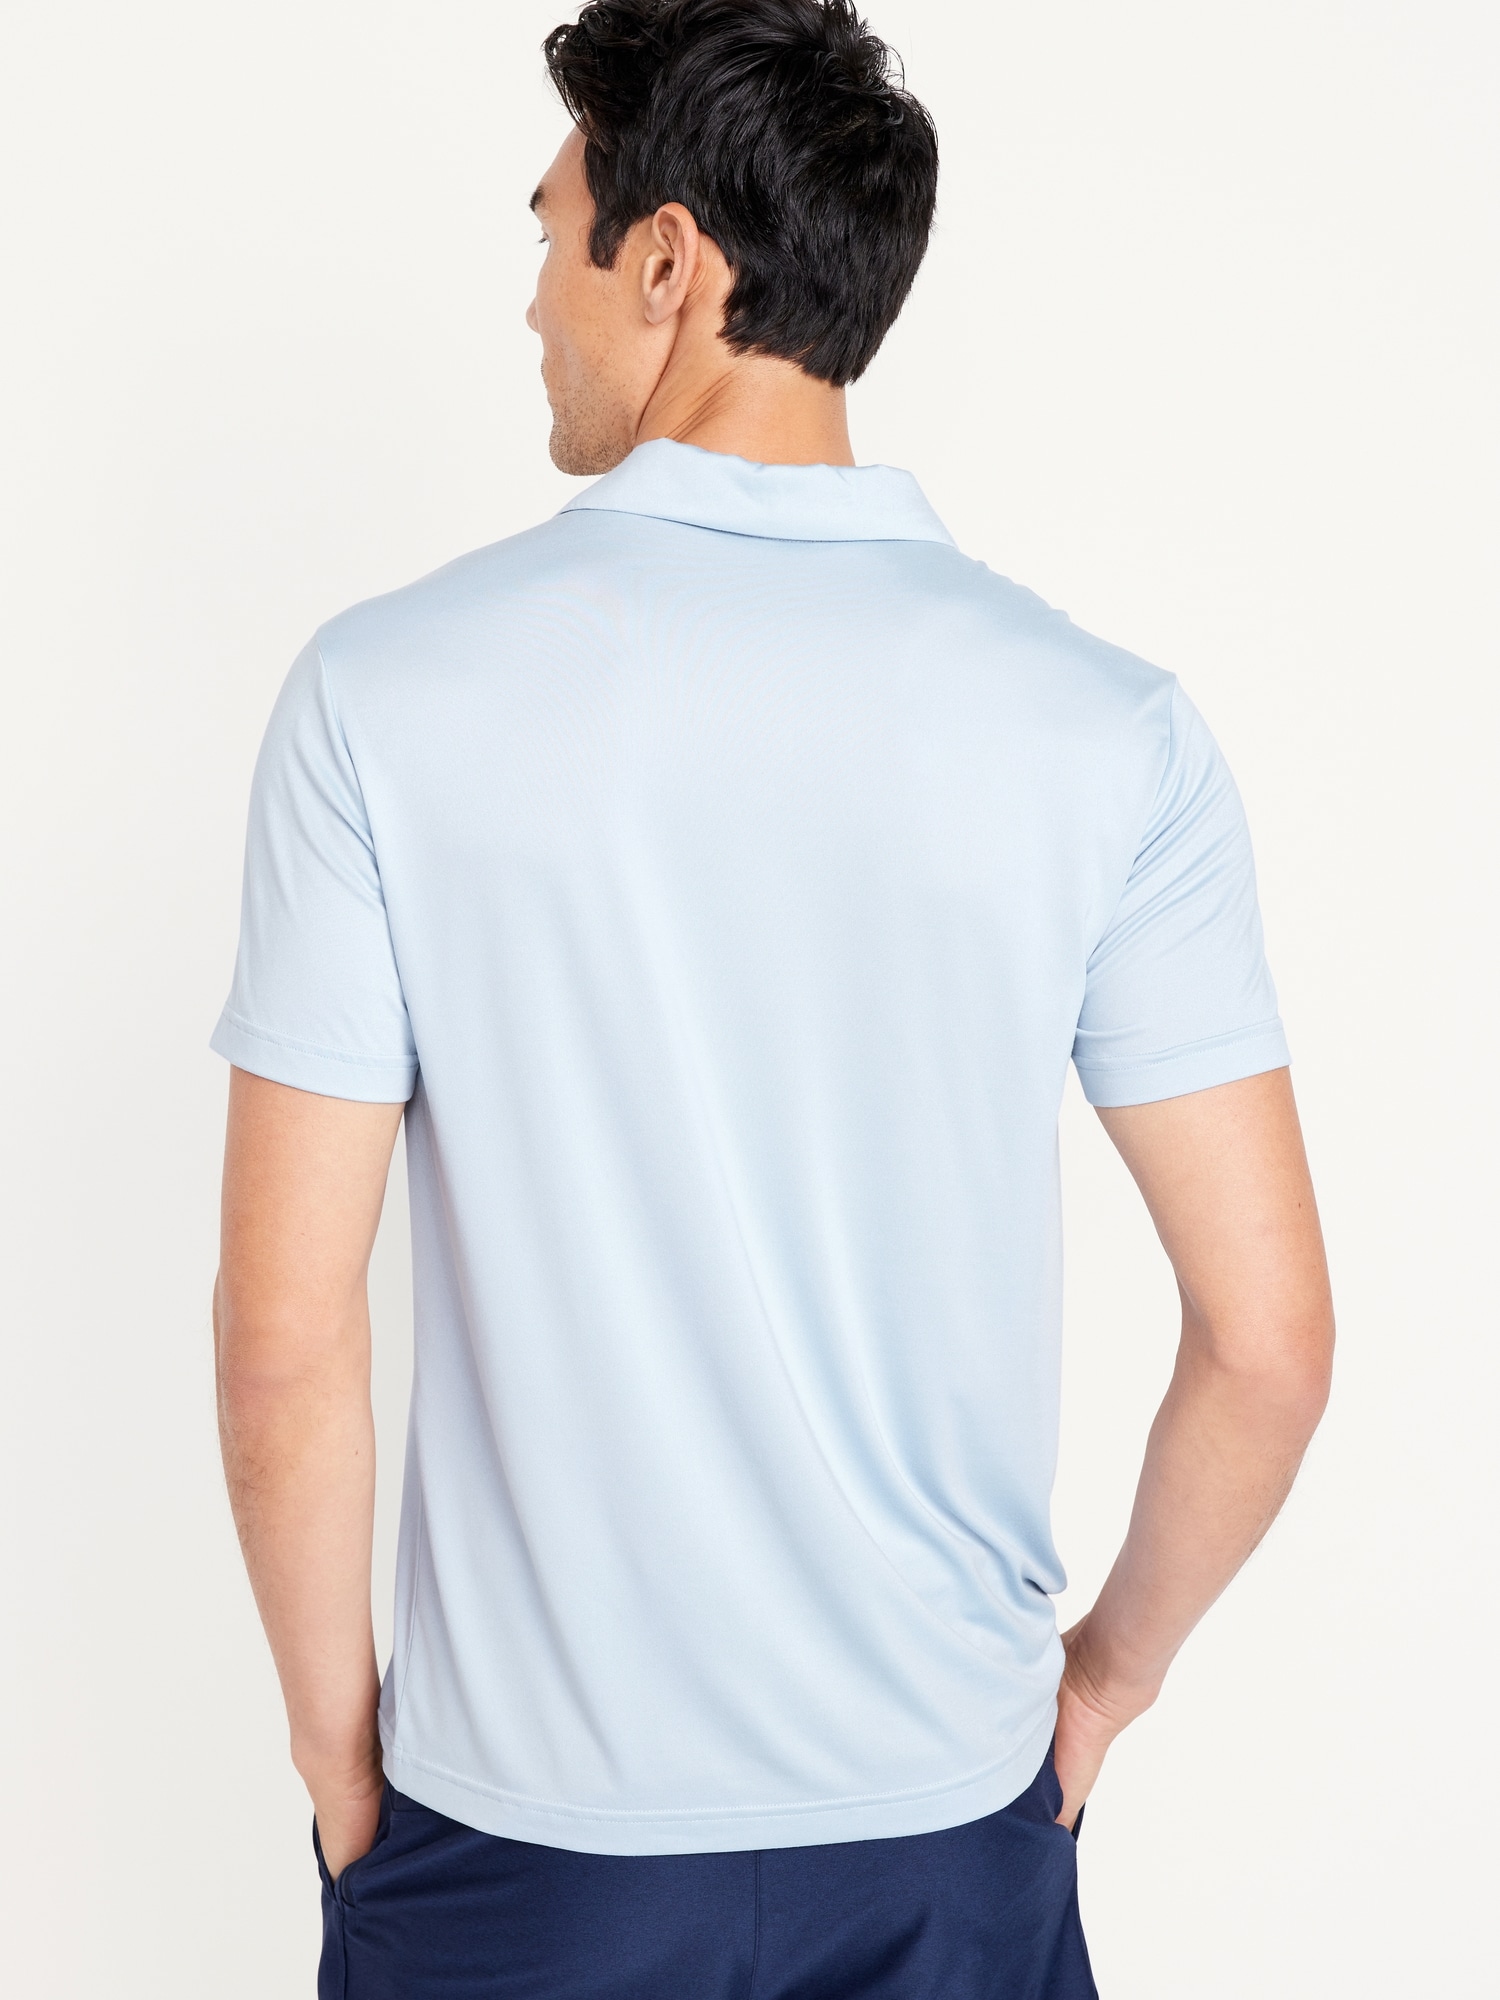 Cloud 94 Soft Polo | Old Navy